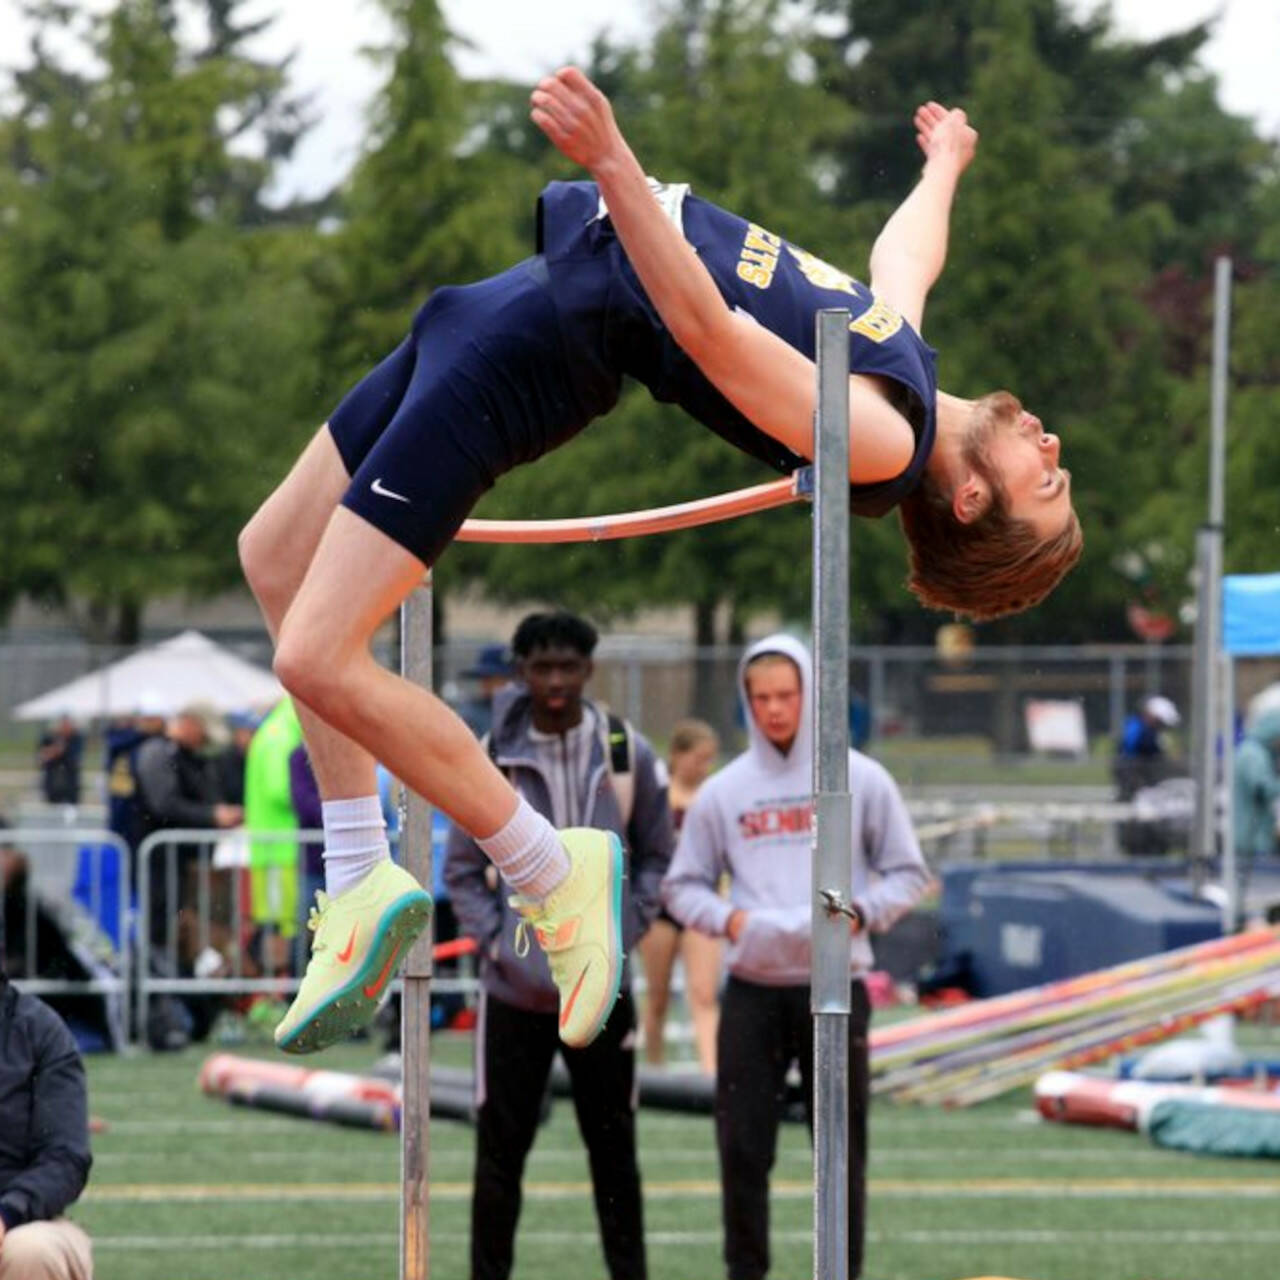 PHOTO COURTESY OF DENNIS NELSON Aberdeen senior Andrew Troeh clears six feet on his way to winning the 2A state high jump championship on Saturday at Mount Tahoma High School in Tacoma. Troeh cleared 6-04 to win the title.